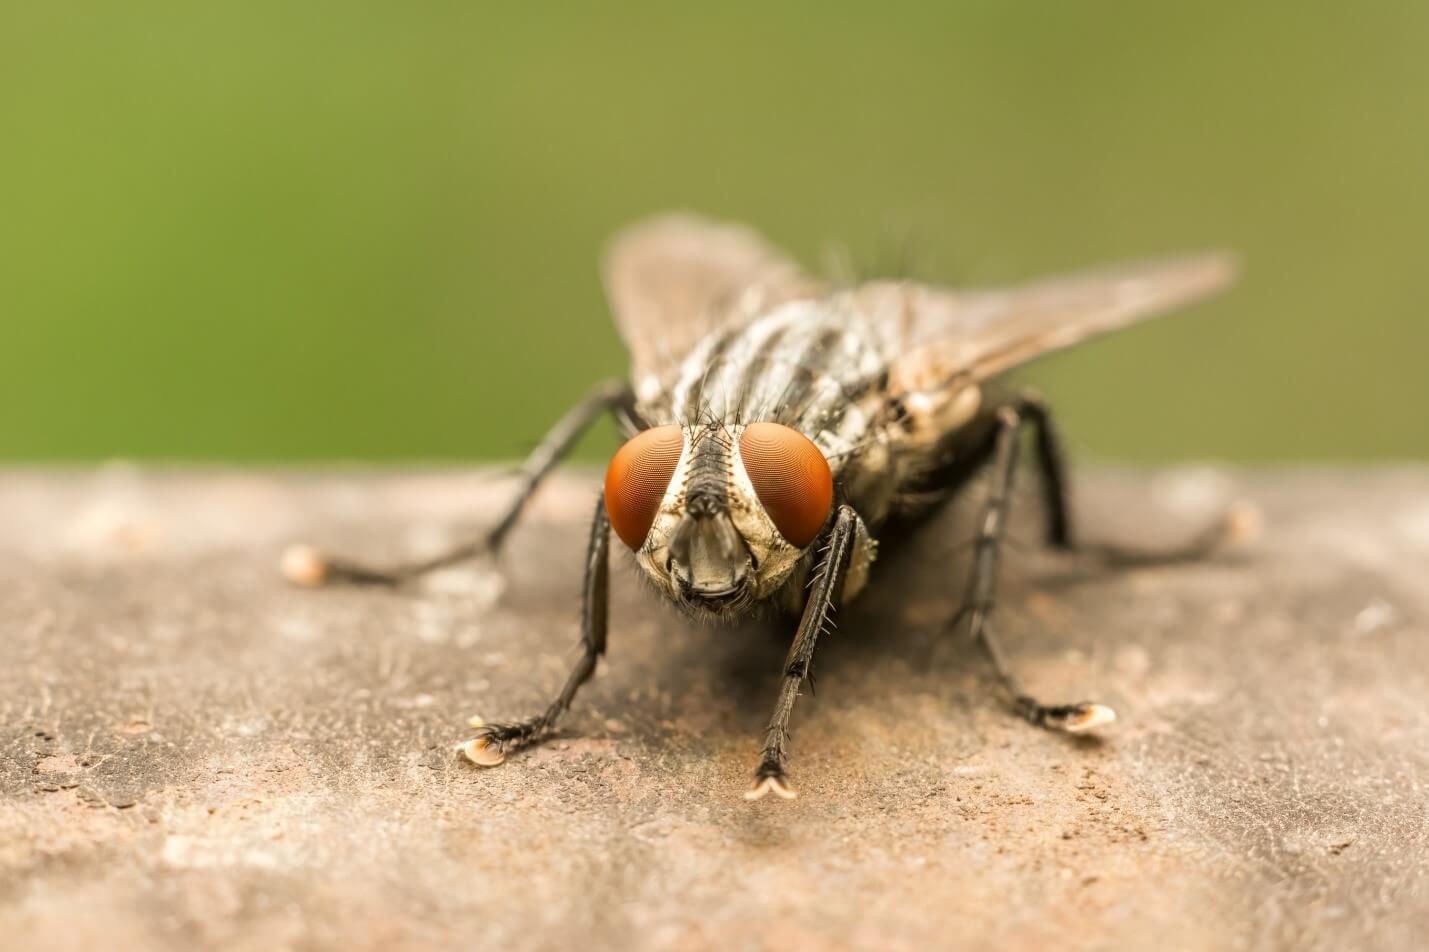 Fly Control in Egg Laying Facilities: Image of Fly